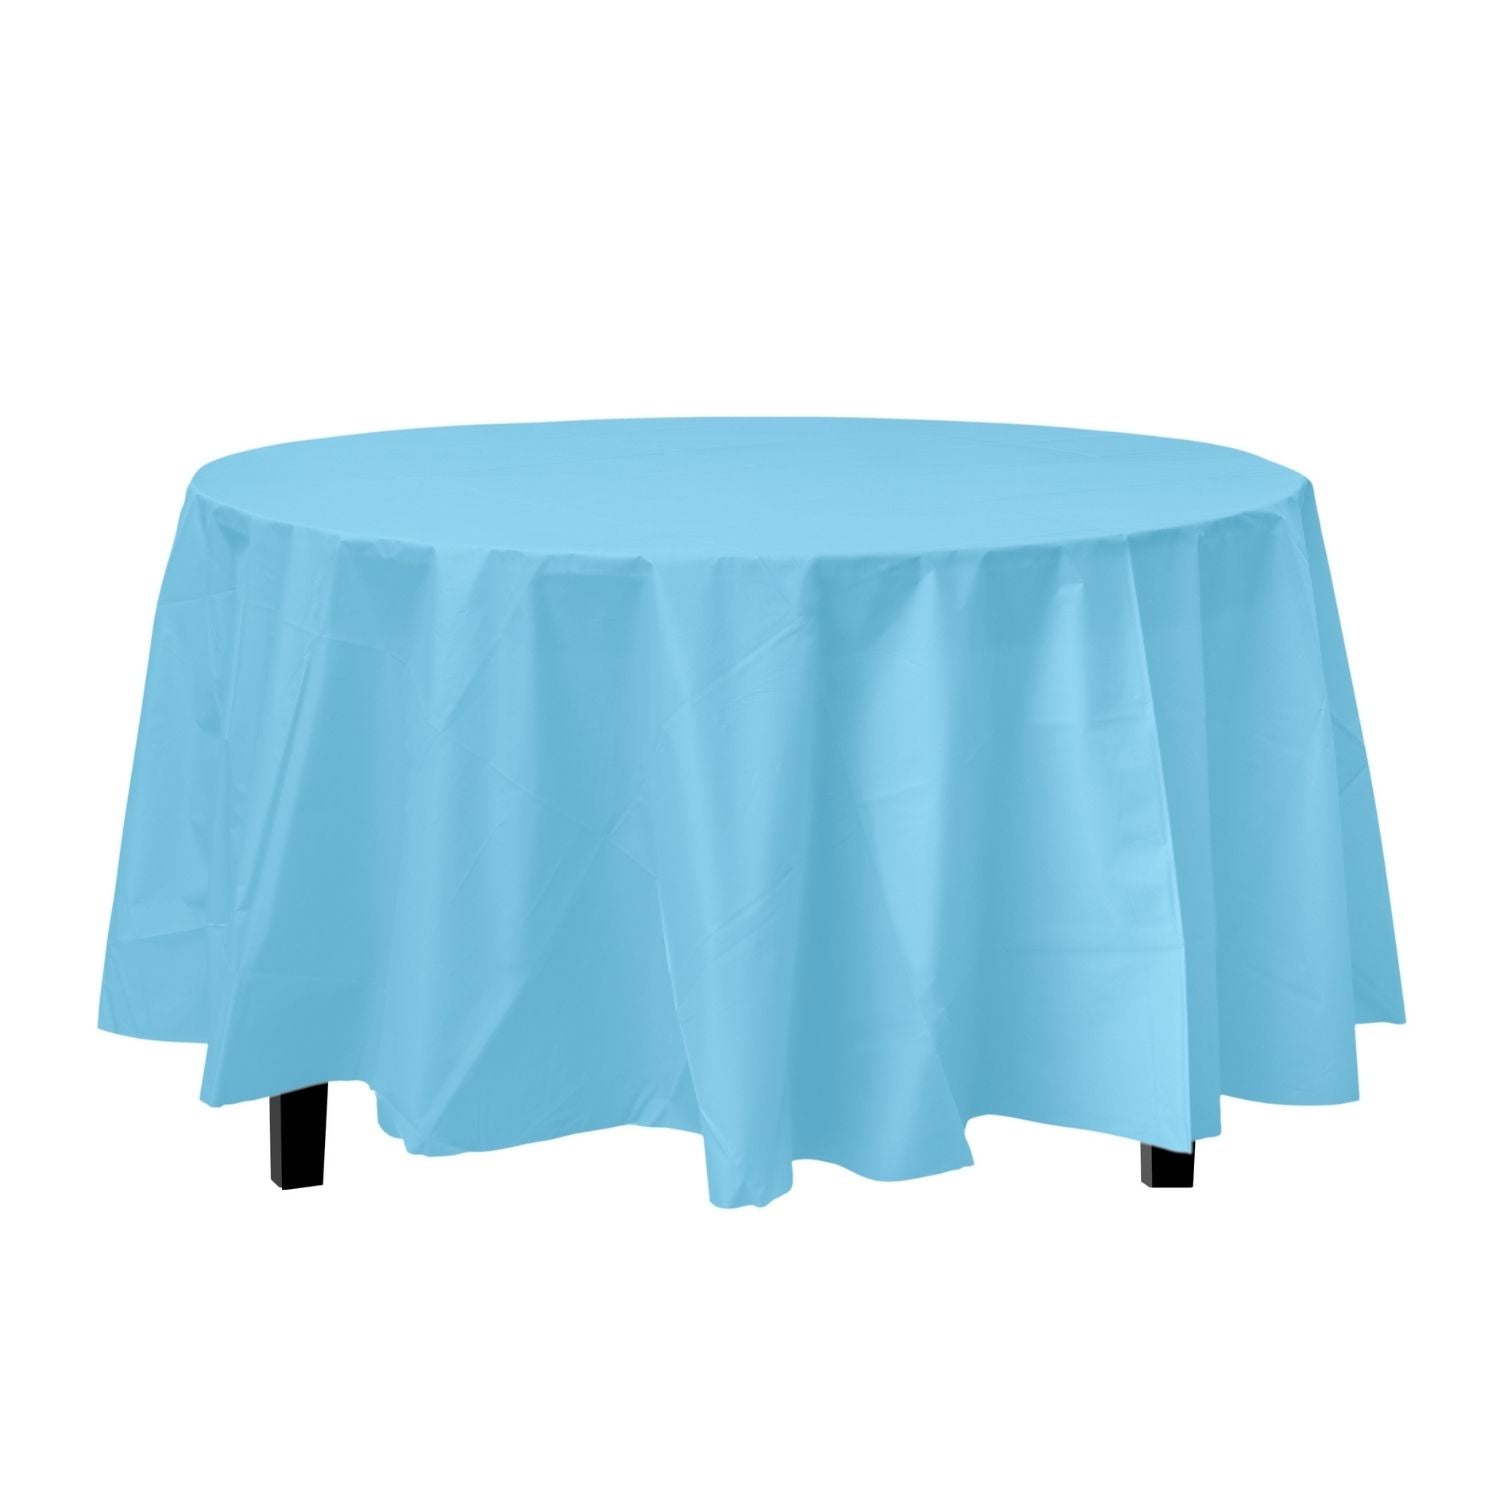 Sky Blue Round Plastic Tablecloth | 48 Count - Yom Tov Settings